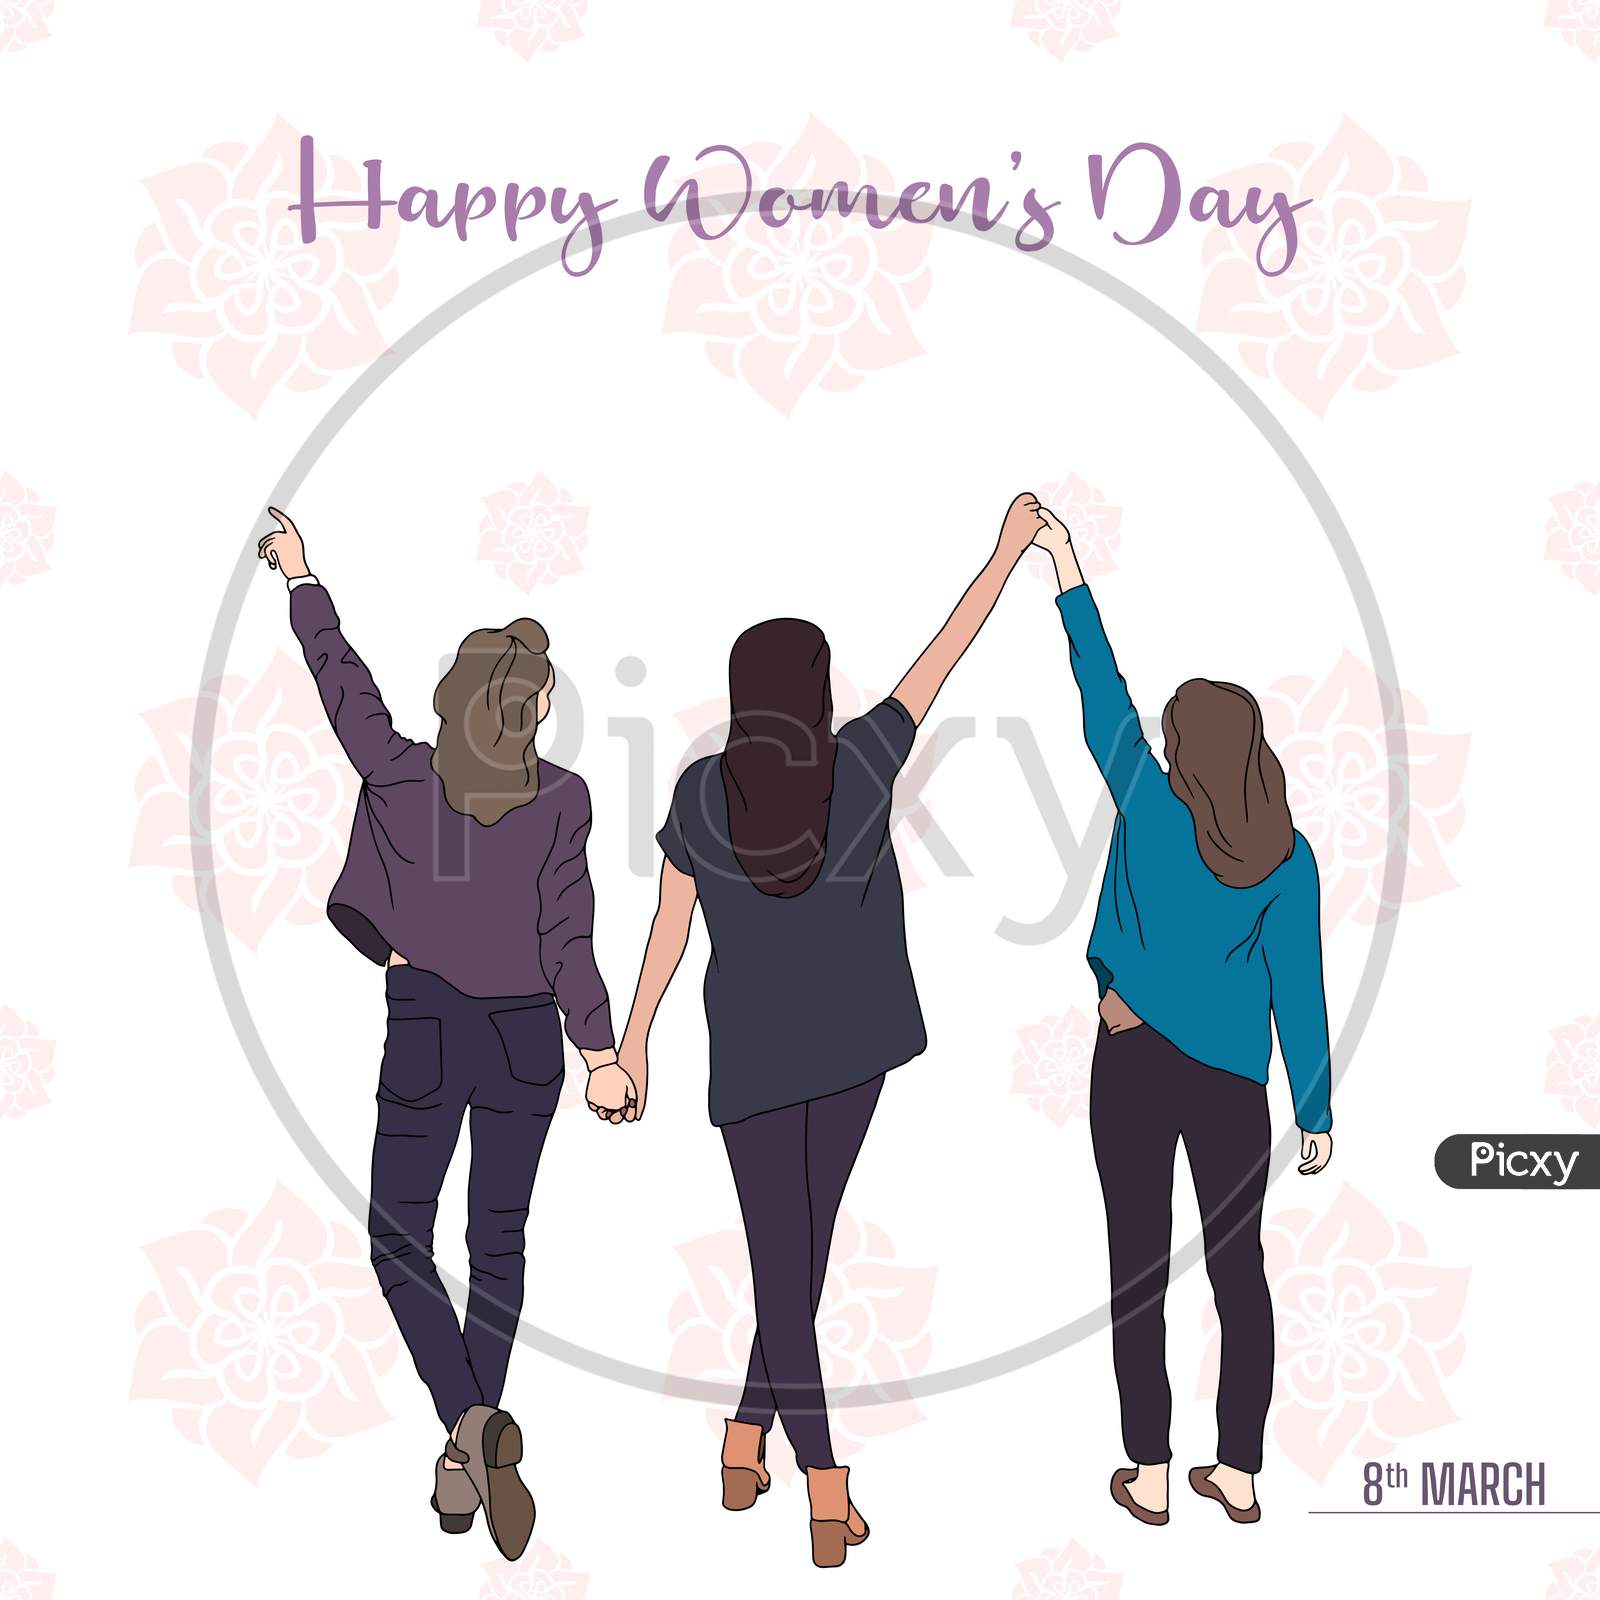 Happy Womens Day Vector Illustration On White Background.